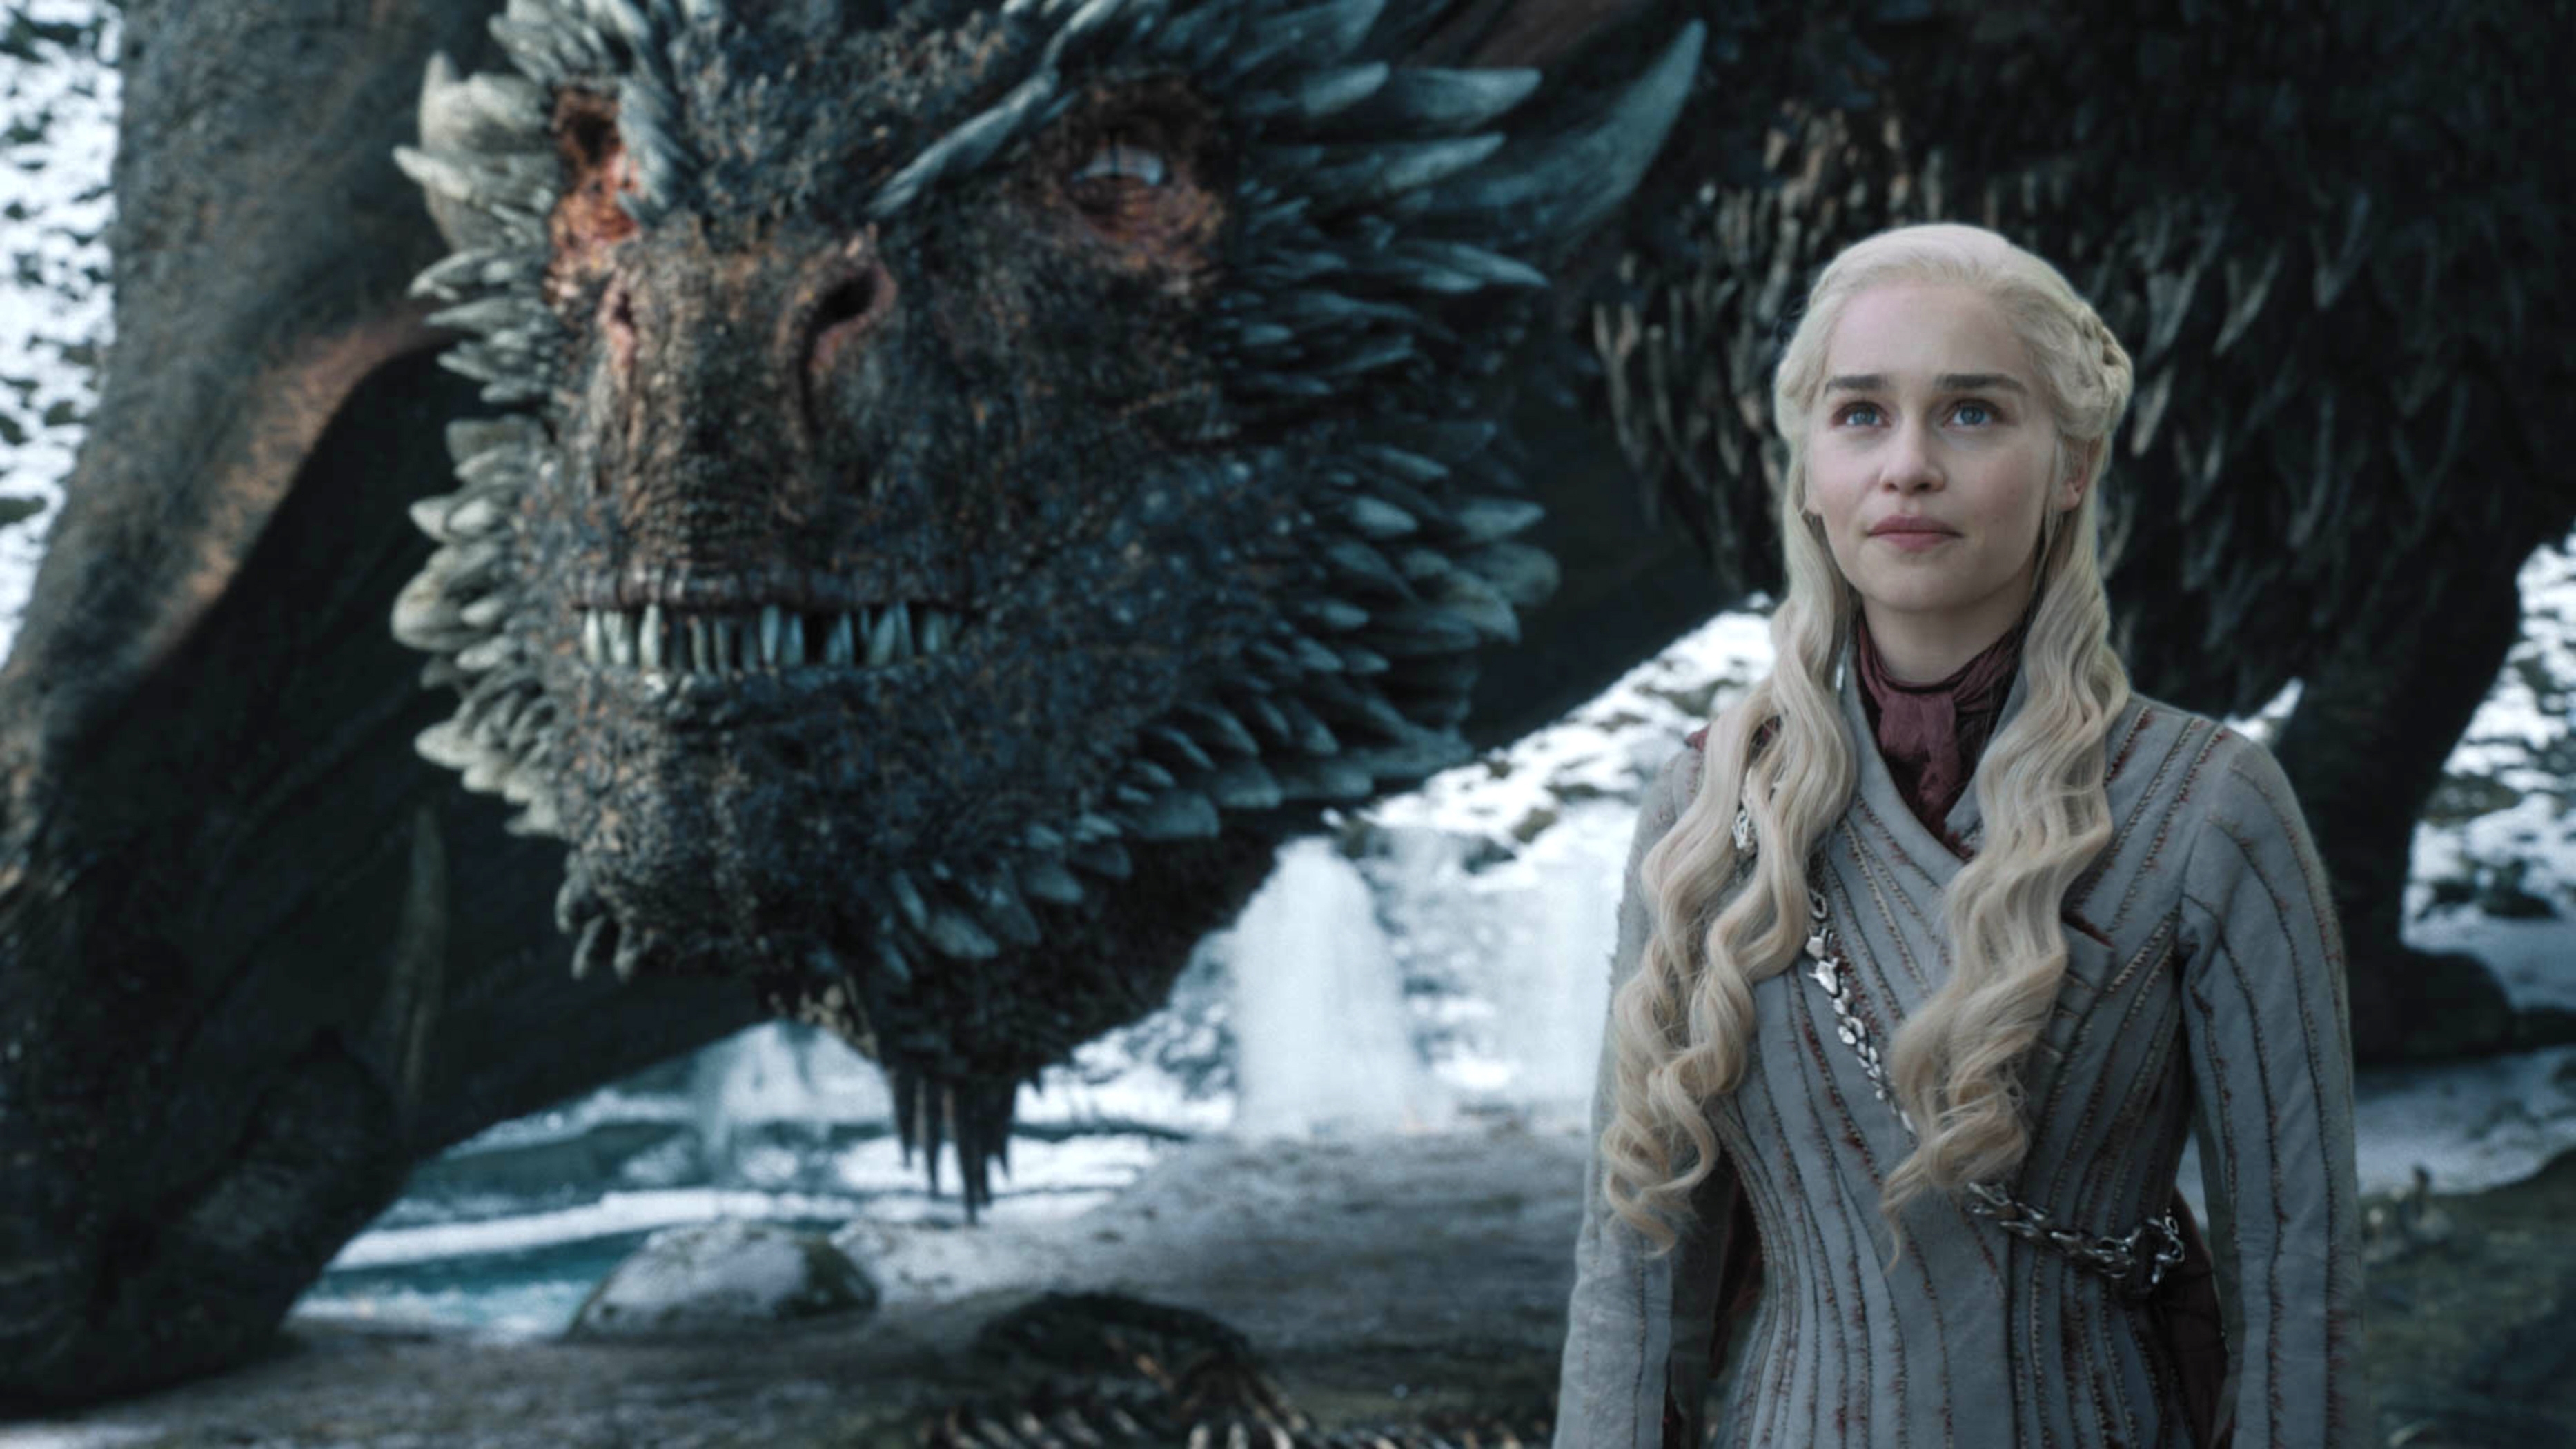 Game of Thrones prequel House of the Dragon confirms there will be no  sexual violence on screen. Here's why that's important